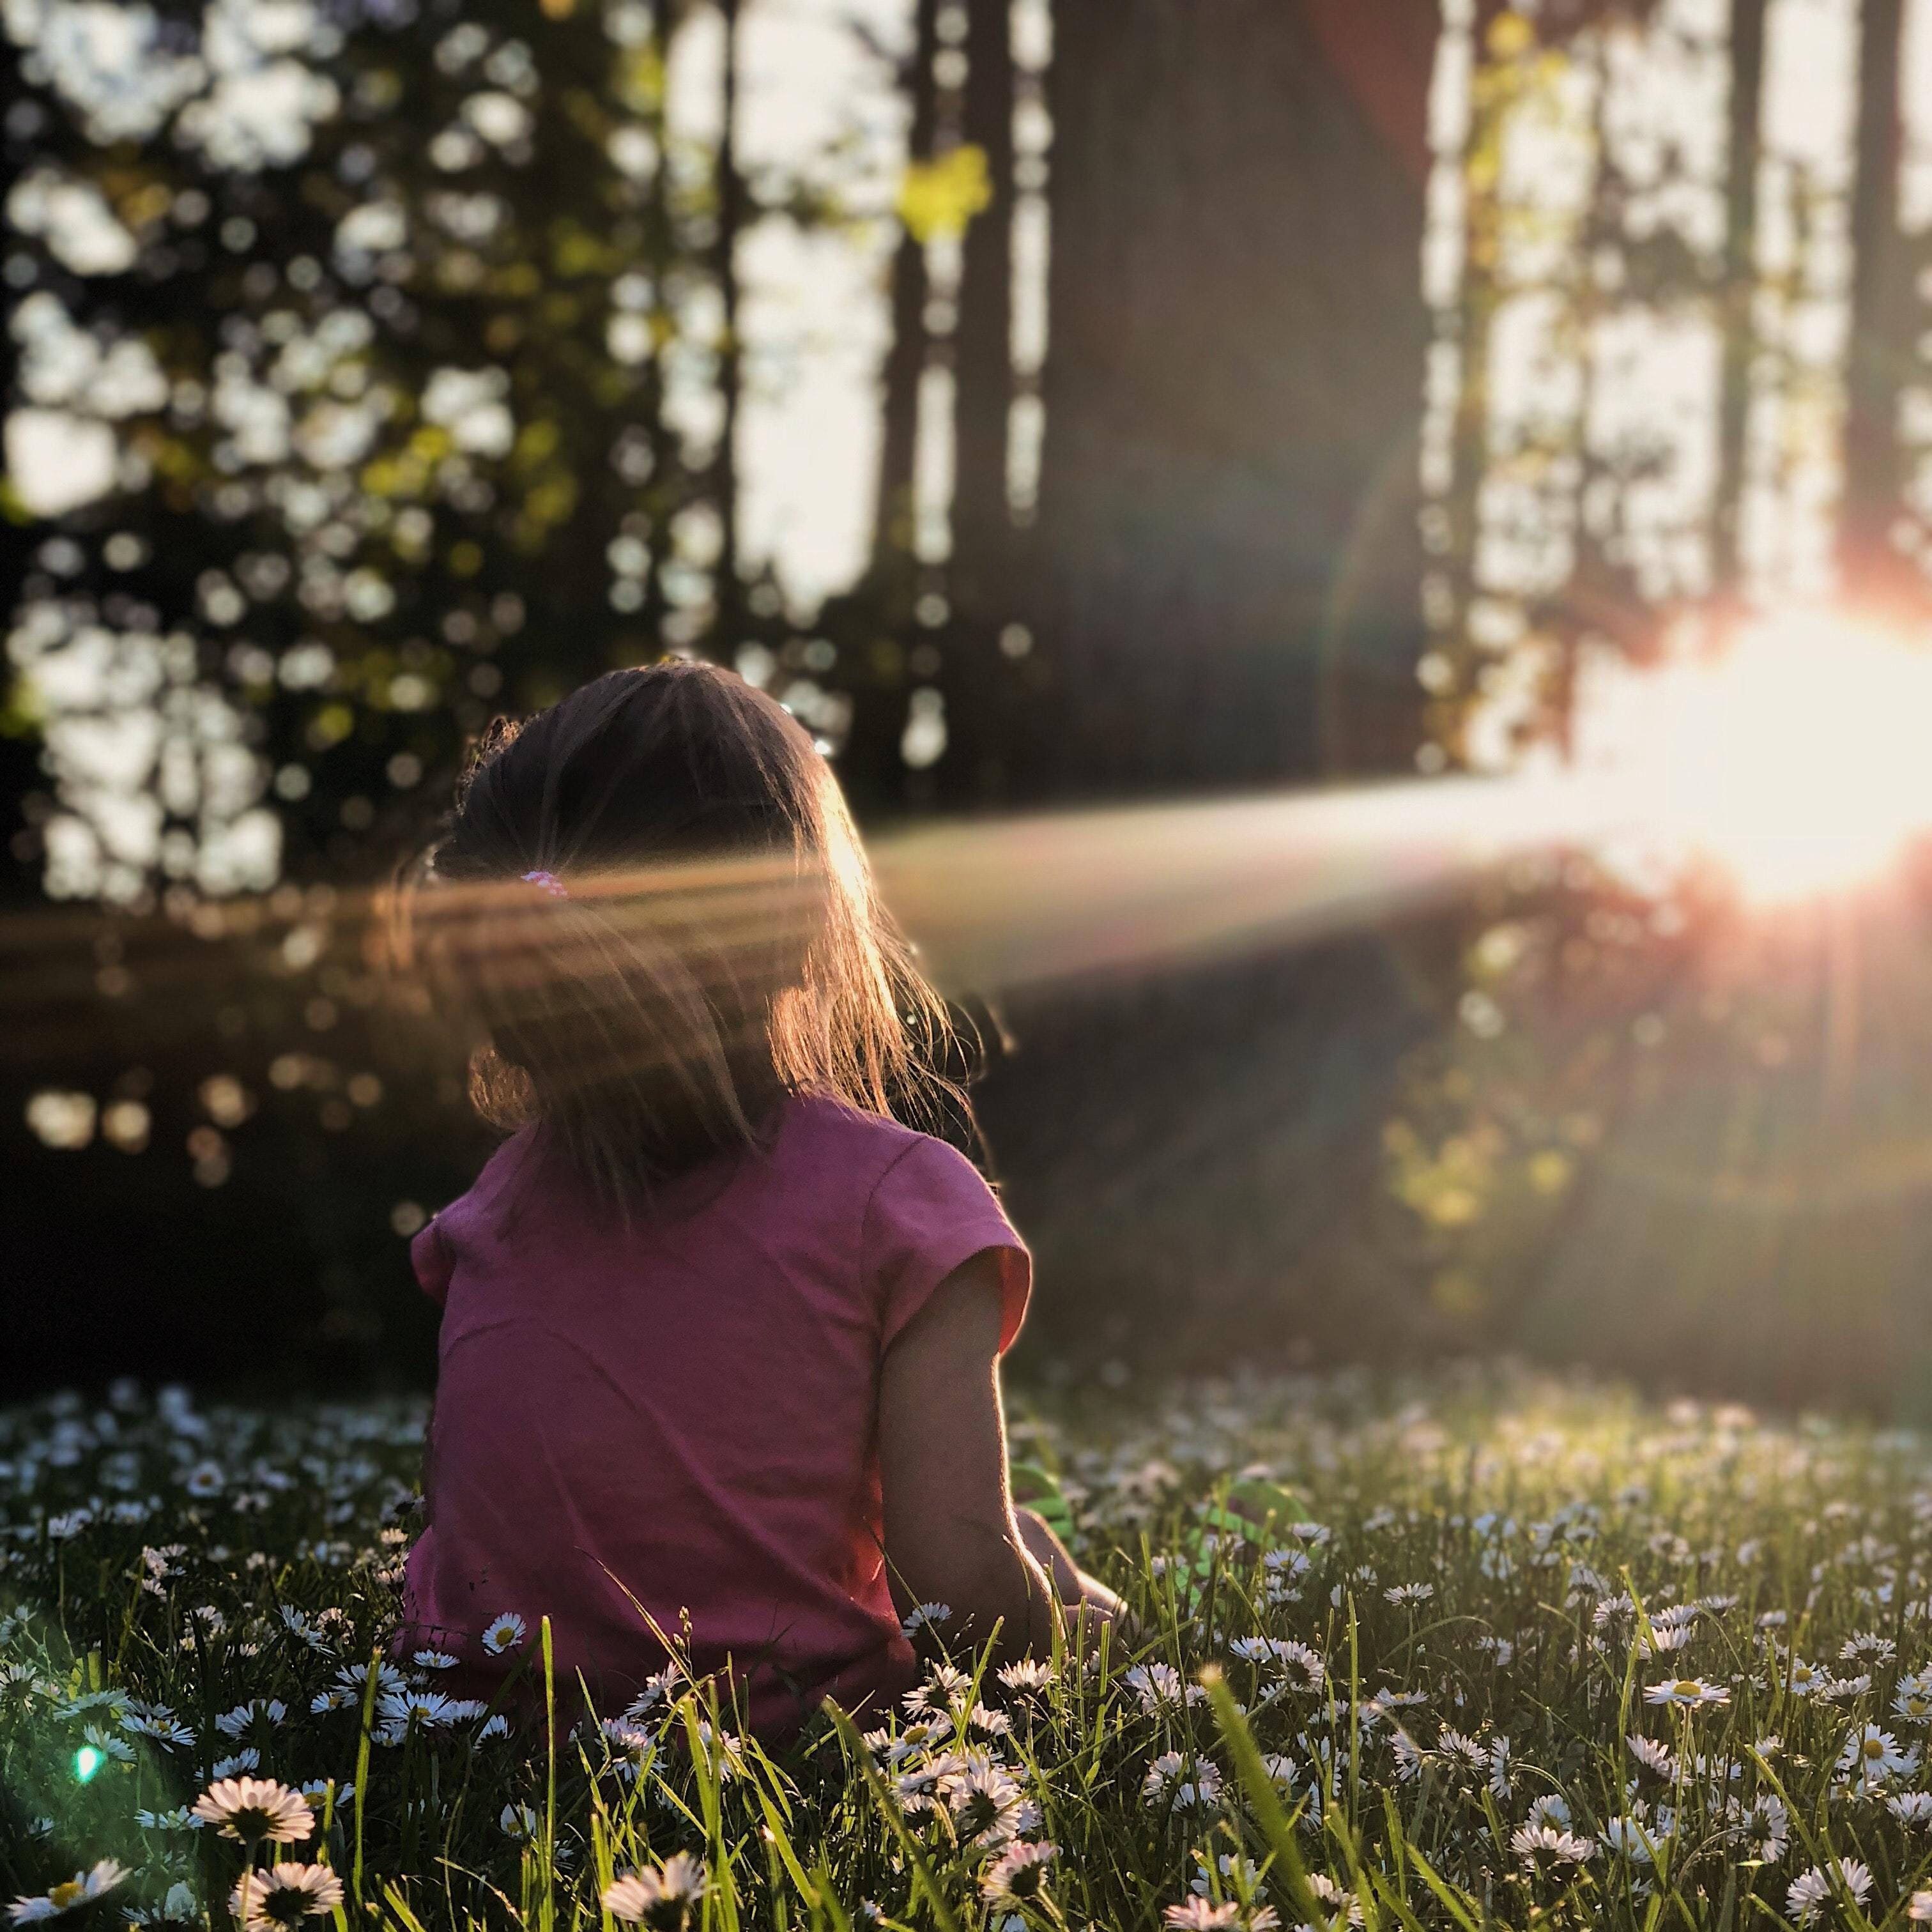 Image of a girl in a forest. She is sitting in a field of flowers, staring at the sun in between the trees.